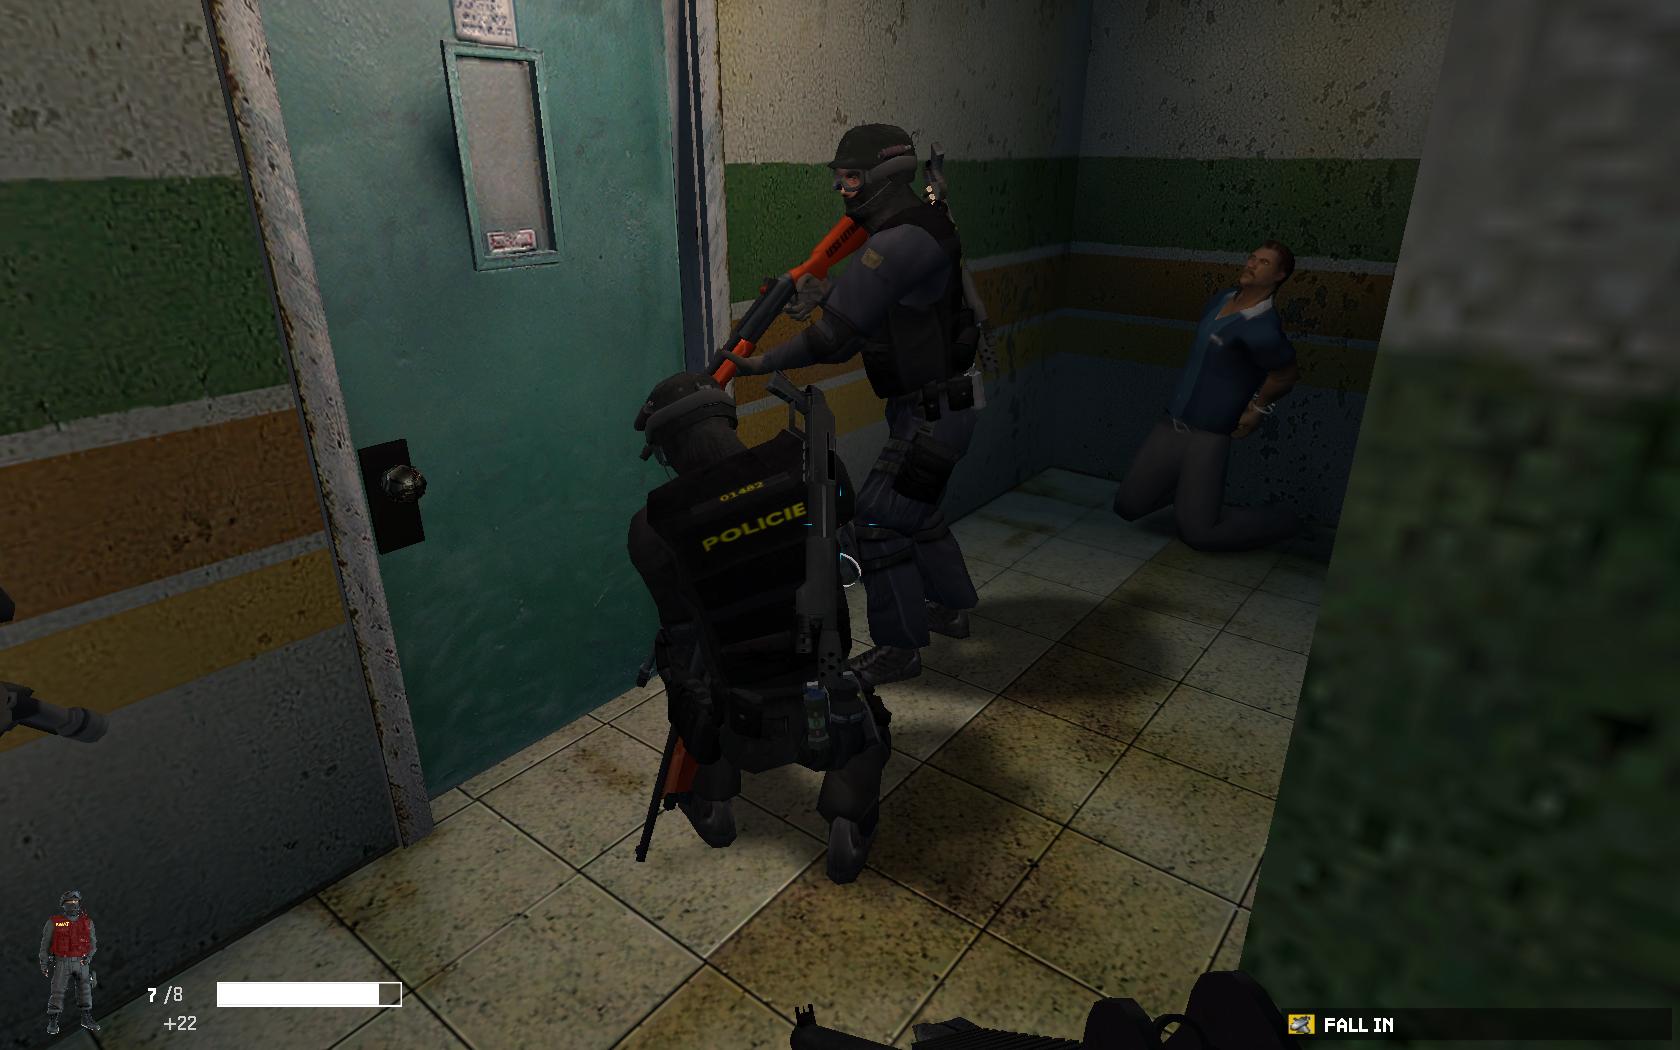 where to put swat 4 mods with gog version